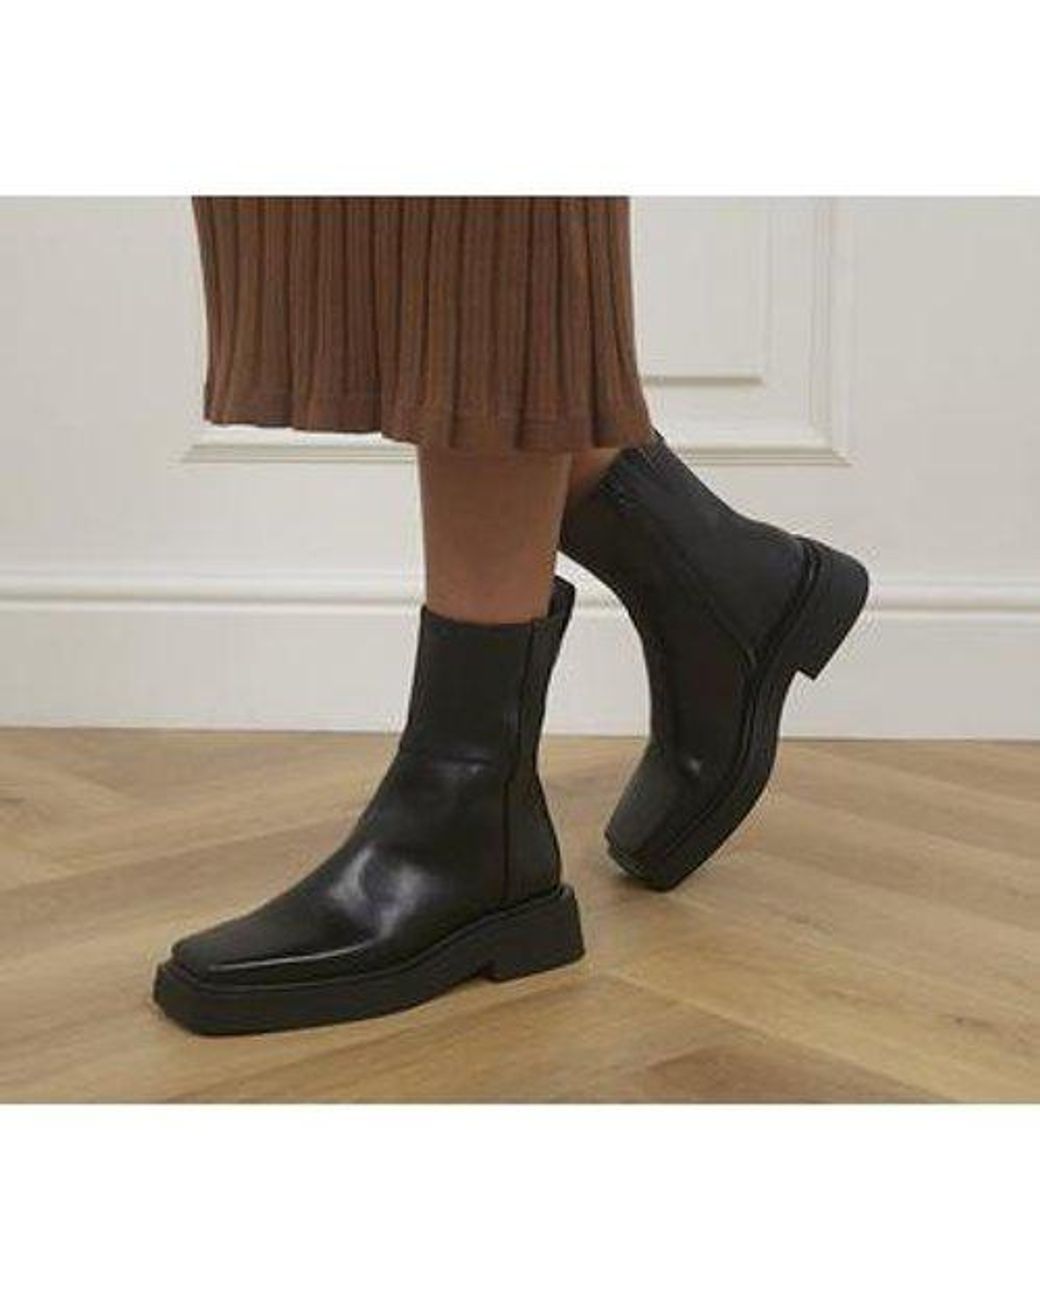 Vagabond Eyra Ankle Boots in Black - Lyst